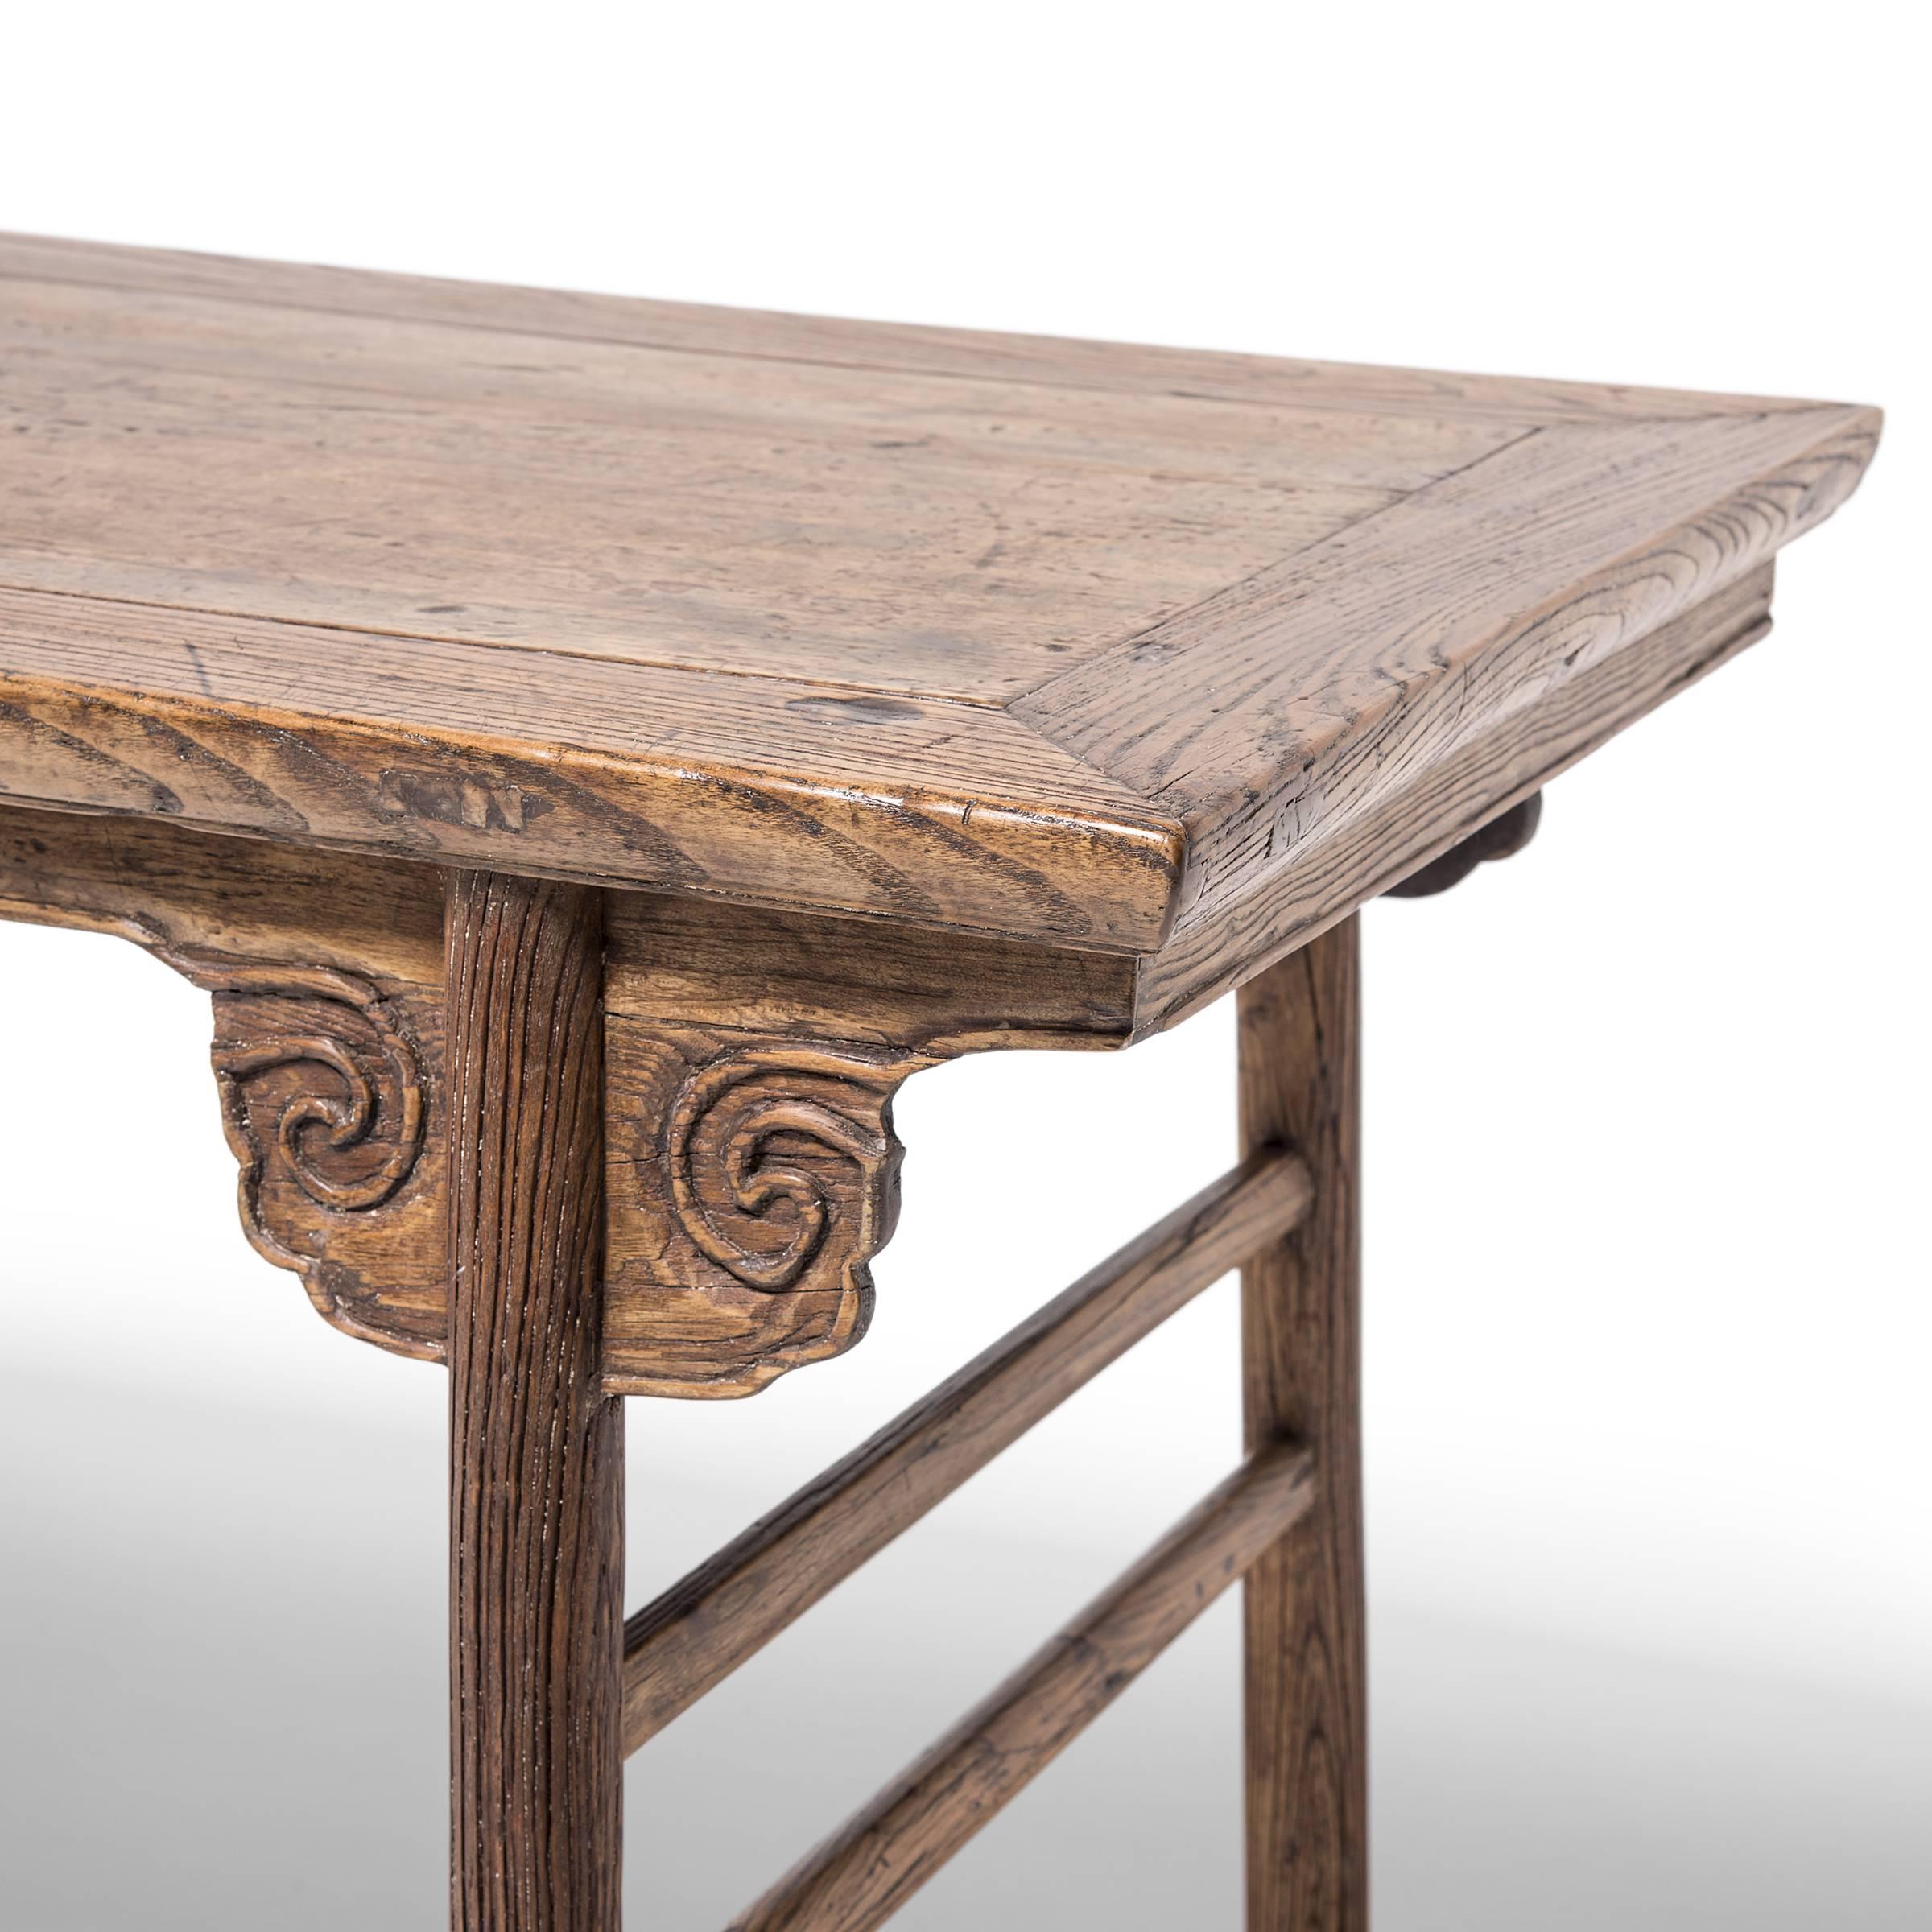 Walnut Mid-19th Century Chinese Writing Table with Cloud Form Spandrels